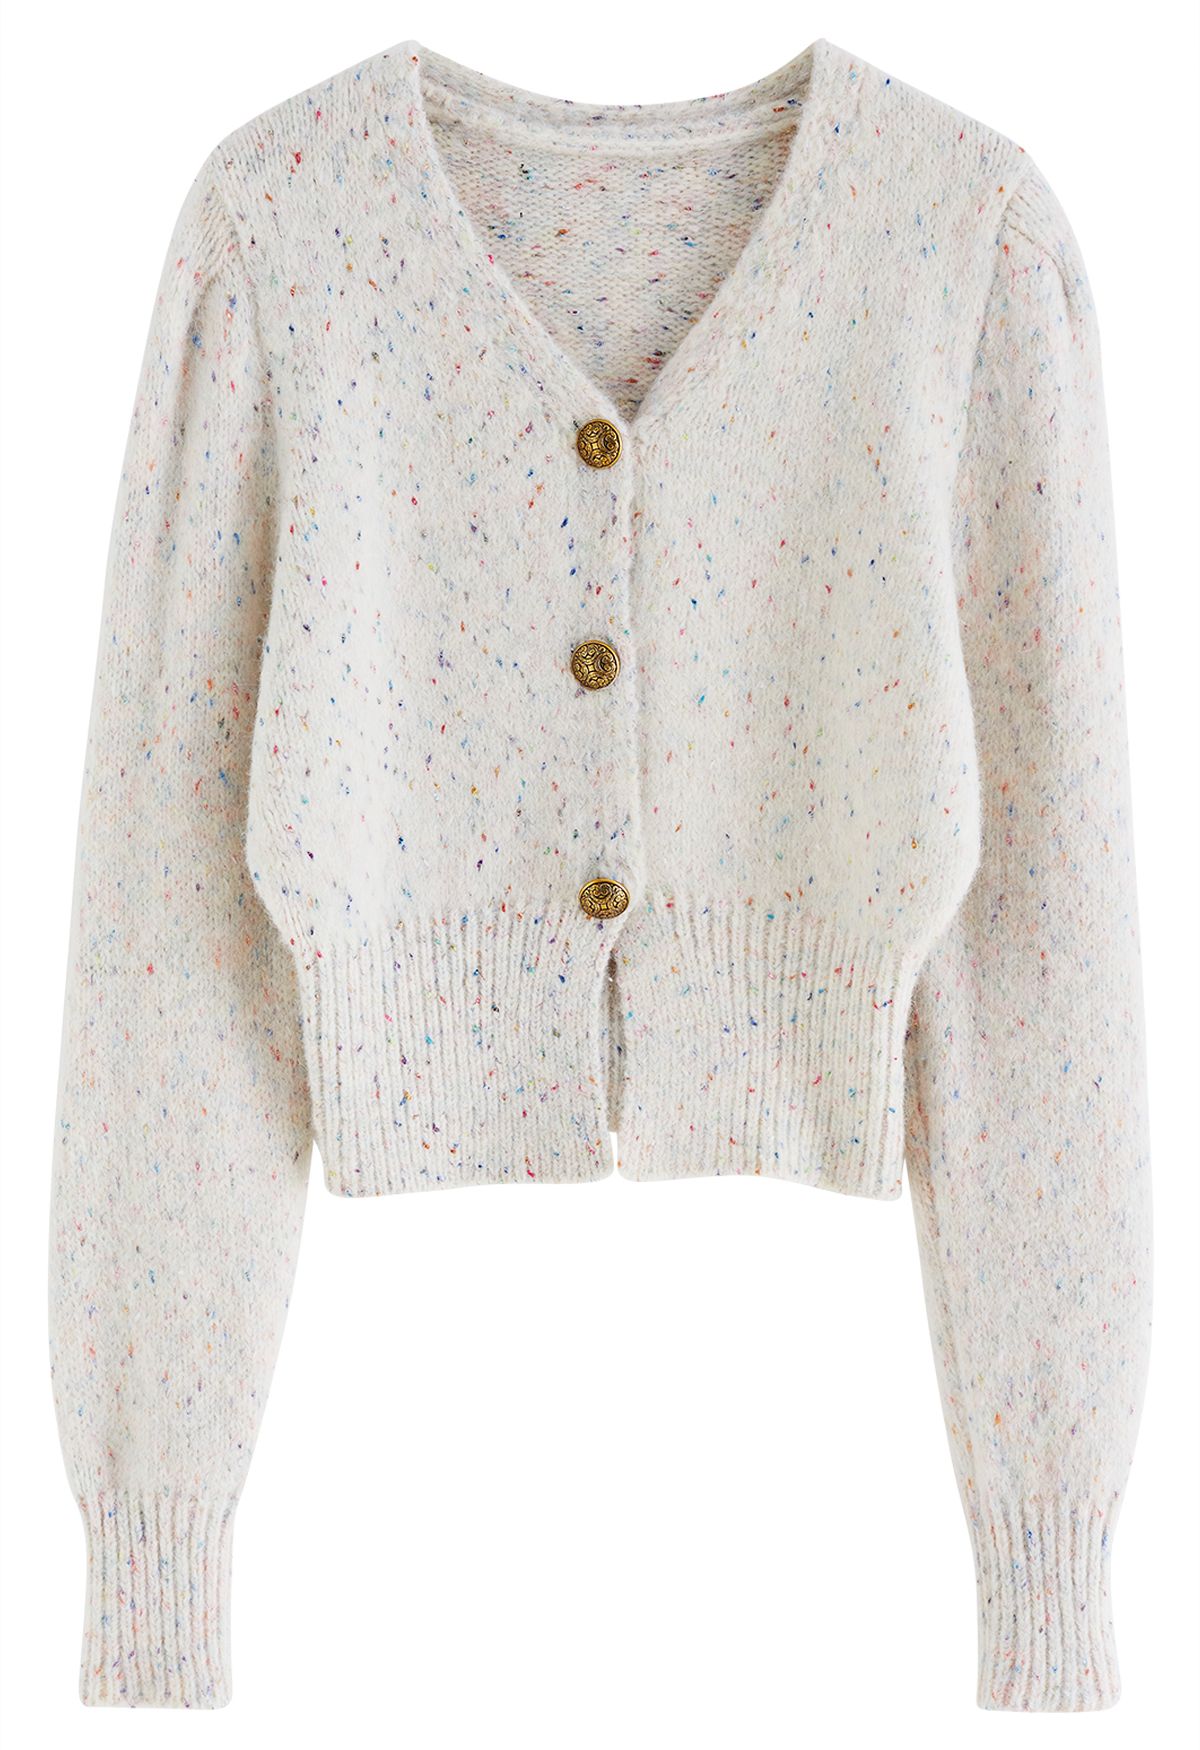 Golden Button Down Confetti Knit Cardigan in Ivory